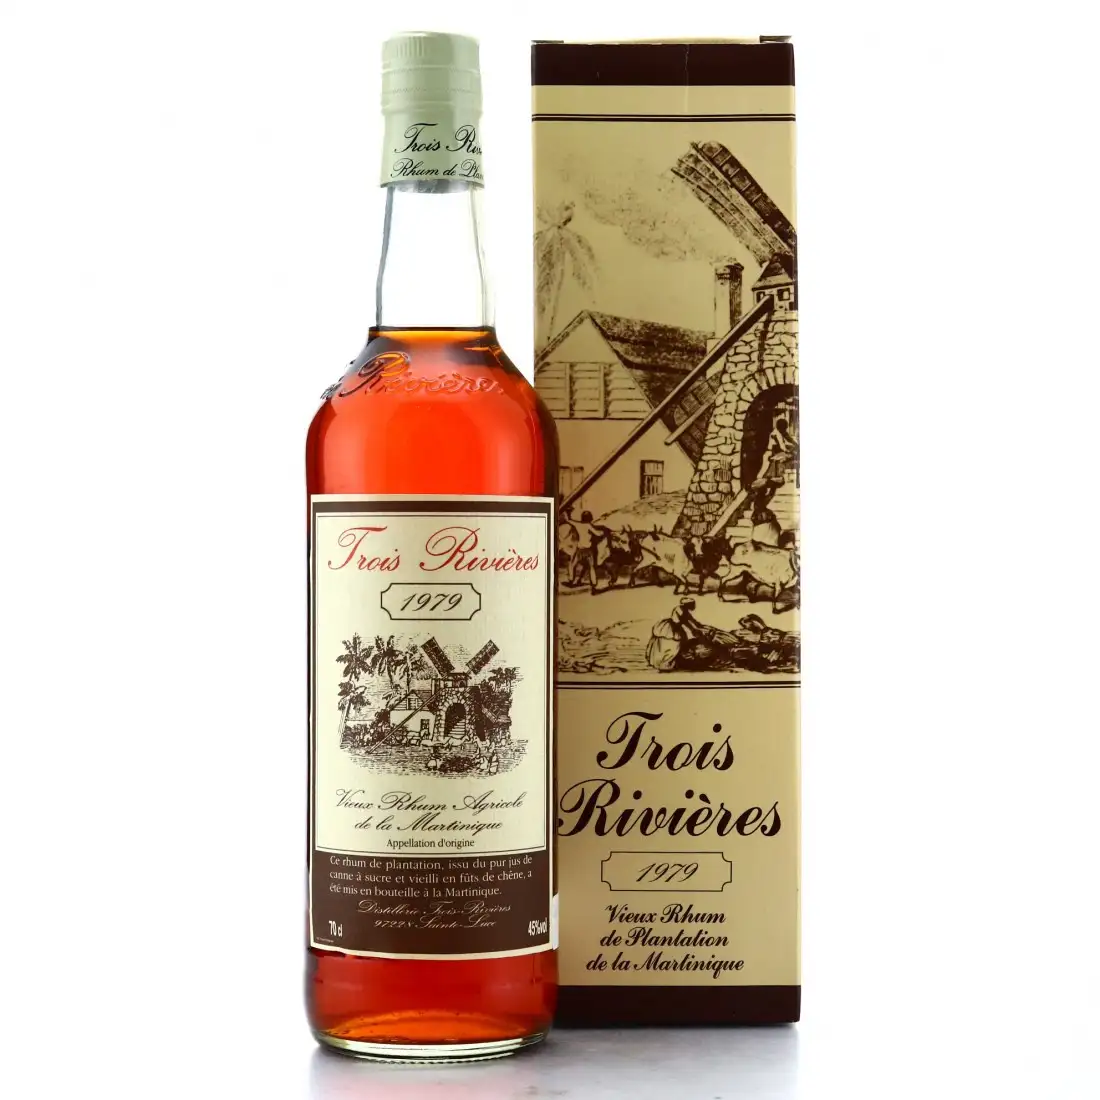 Image of the front of the bottle of the rum Millésime 1979